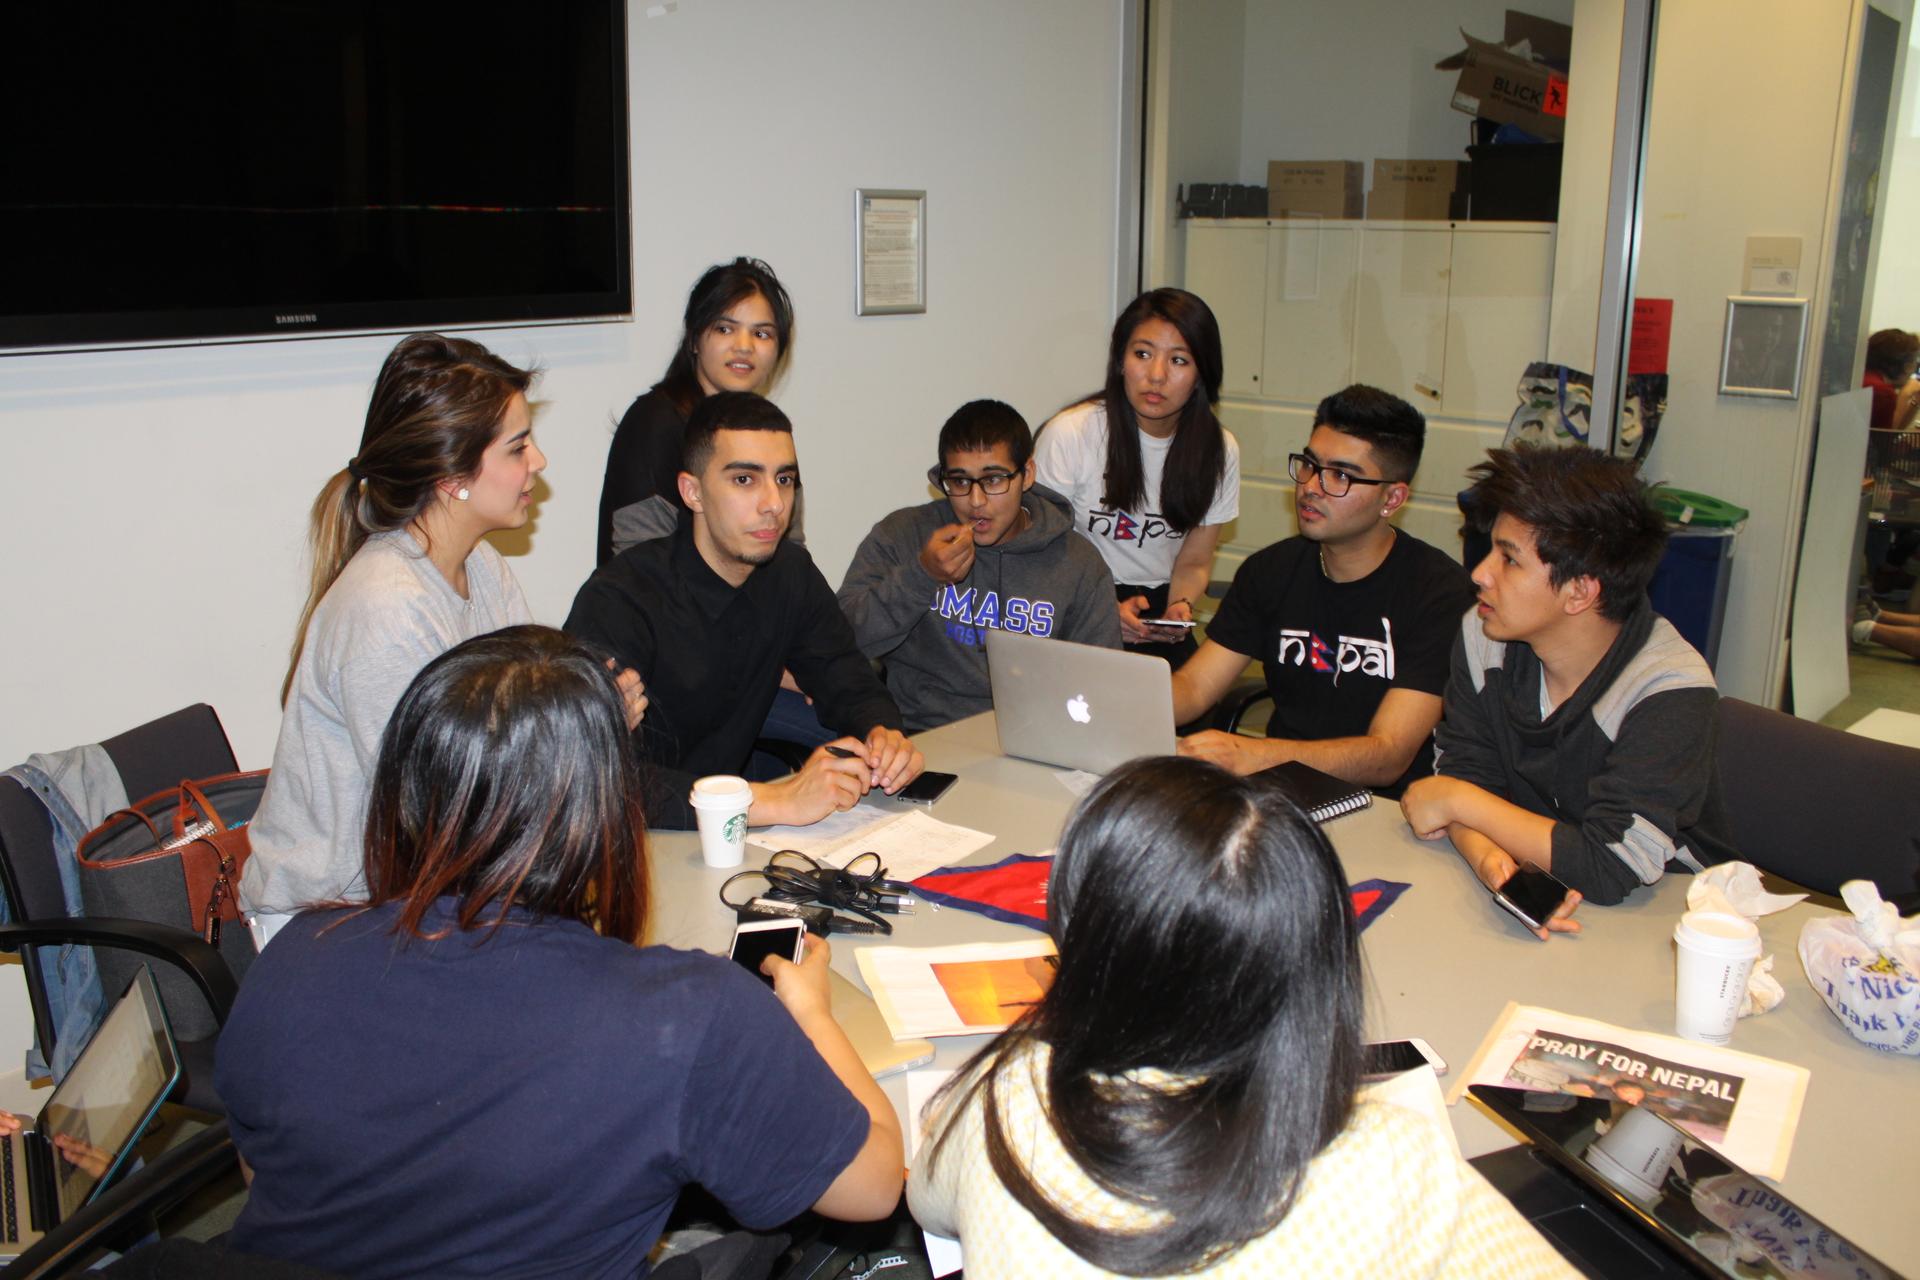 Nepali students at the University of Massachusetts Boston work on their fundraising plan for earthquake relief efforts